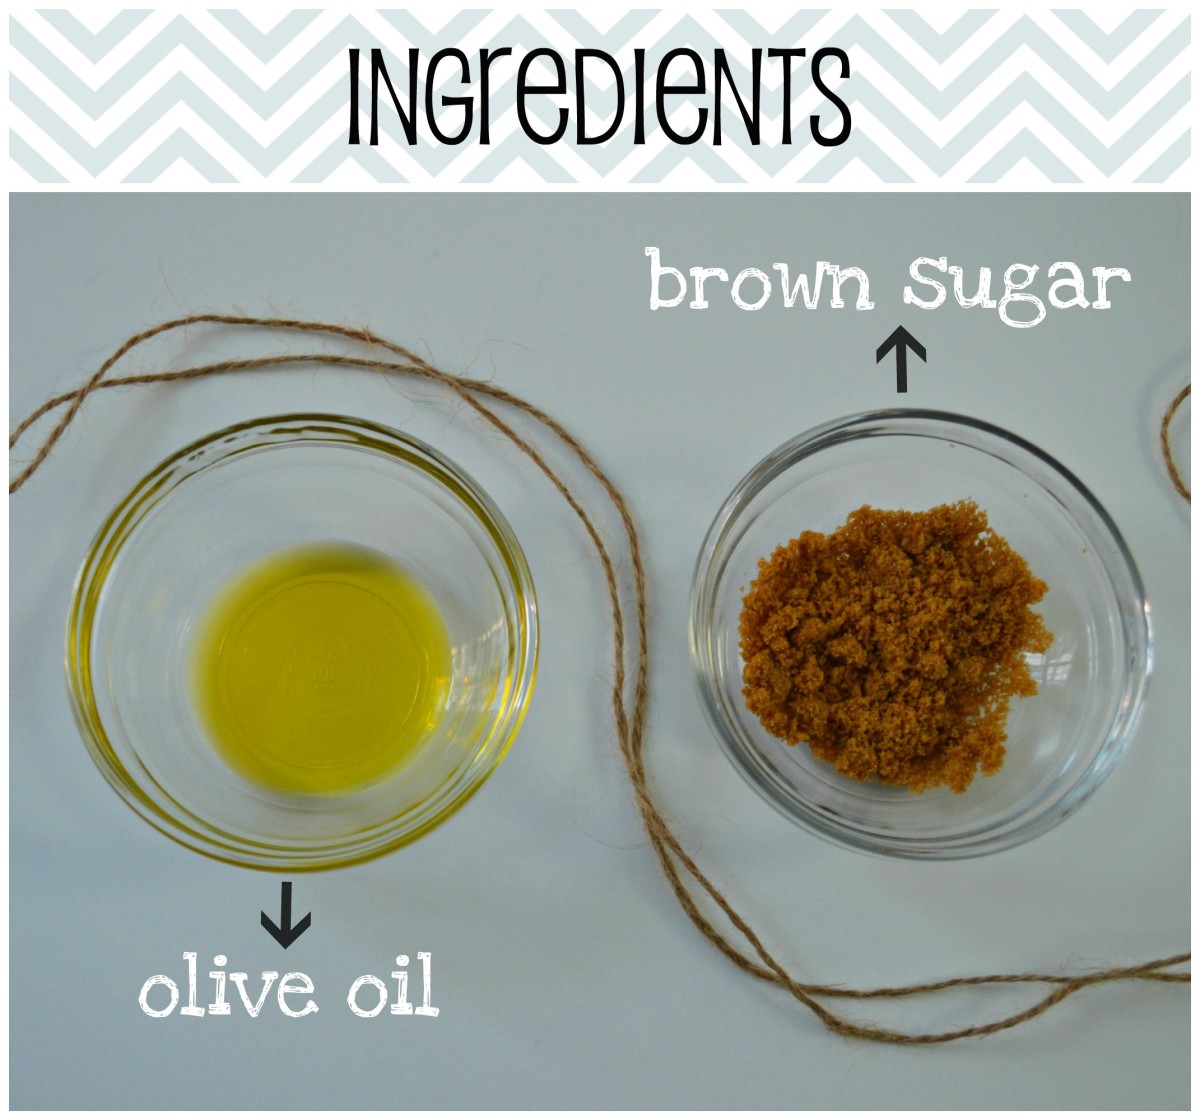 Whip up just 2 ingredients to create a powerful face scrub that exfoliates and deep cleanses pores.